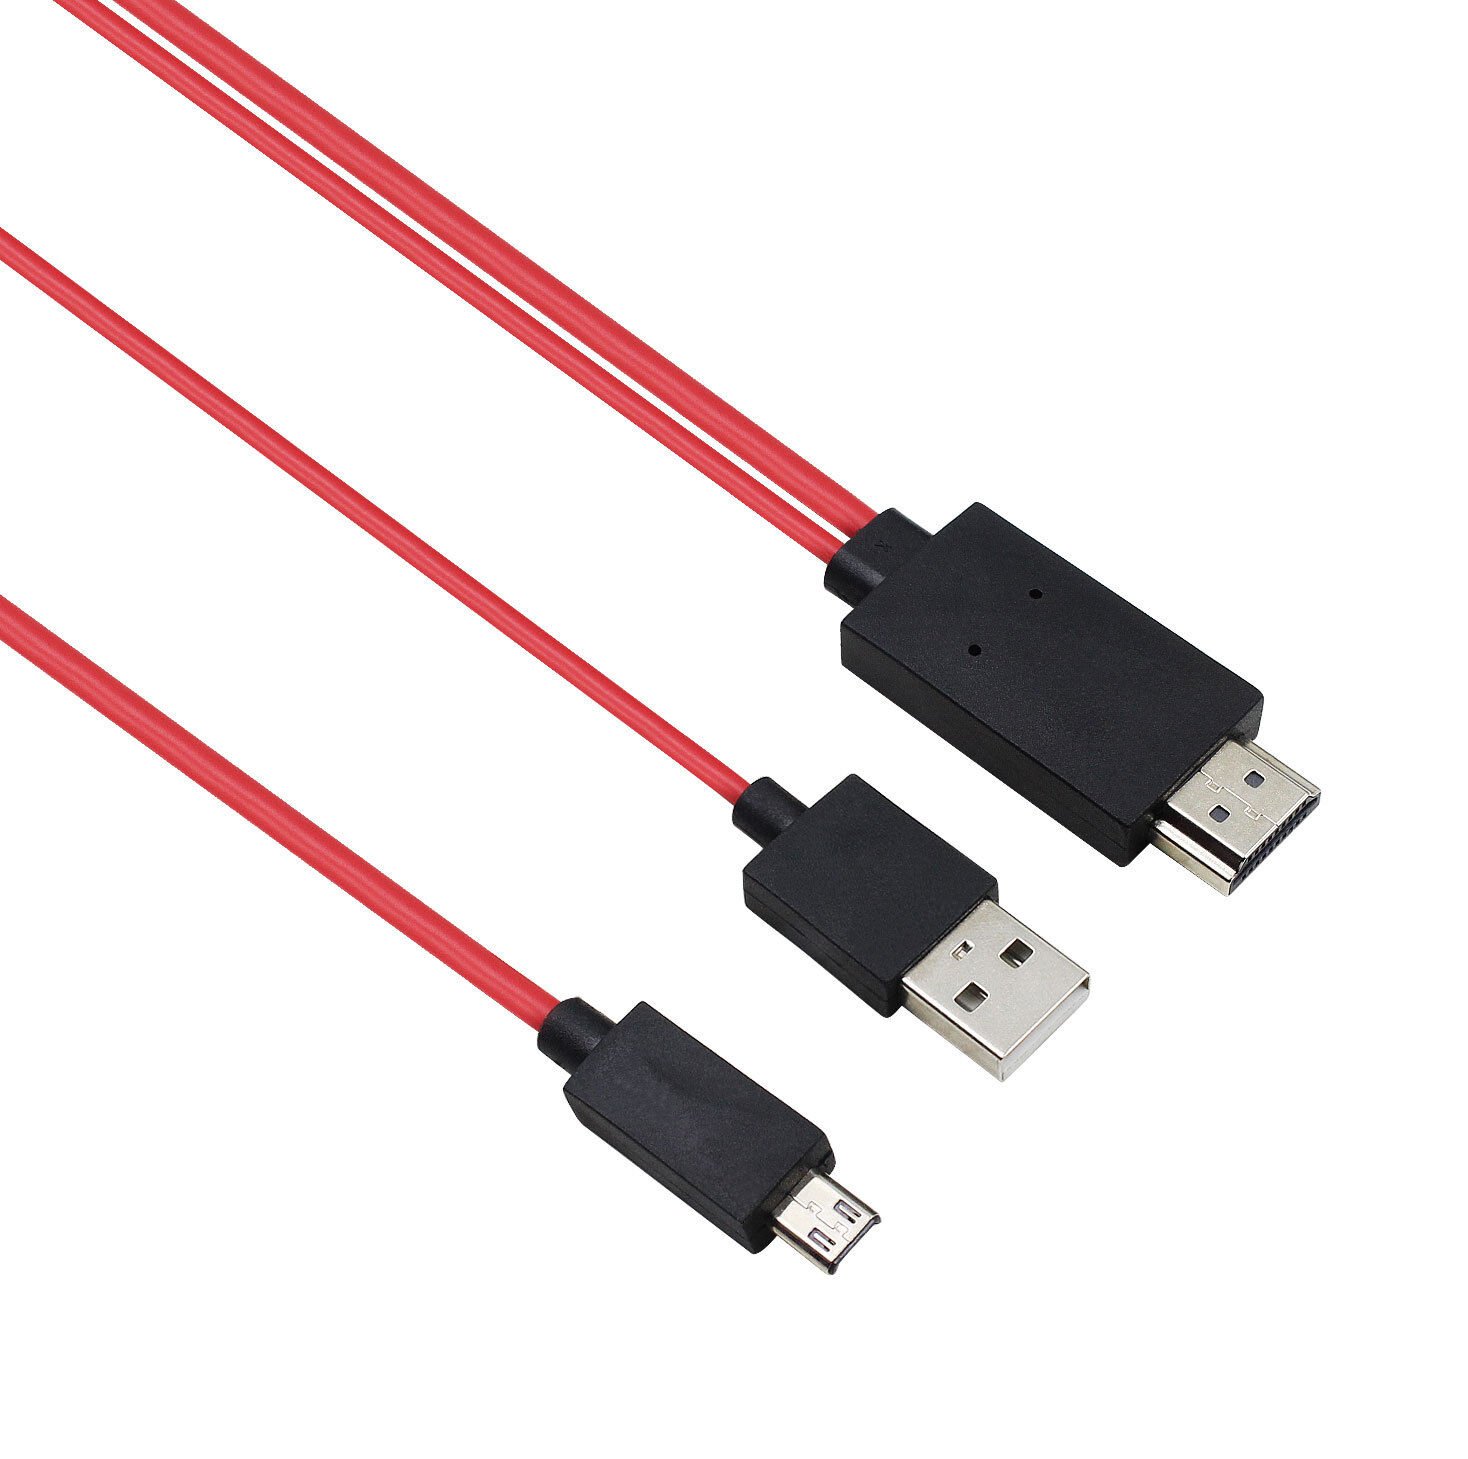 2M MHL to HDMI HD TV Adapter Cable for Samsung Galaxy Tab 3 10.1 8.0-Inch Tablet